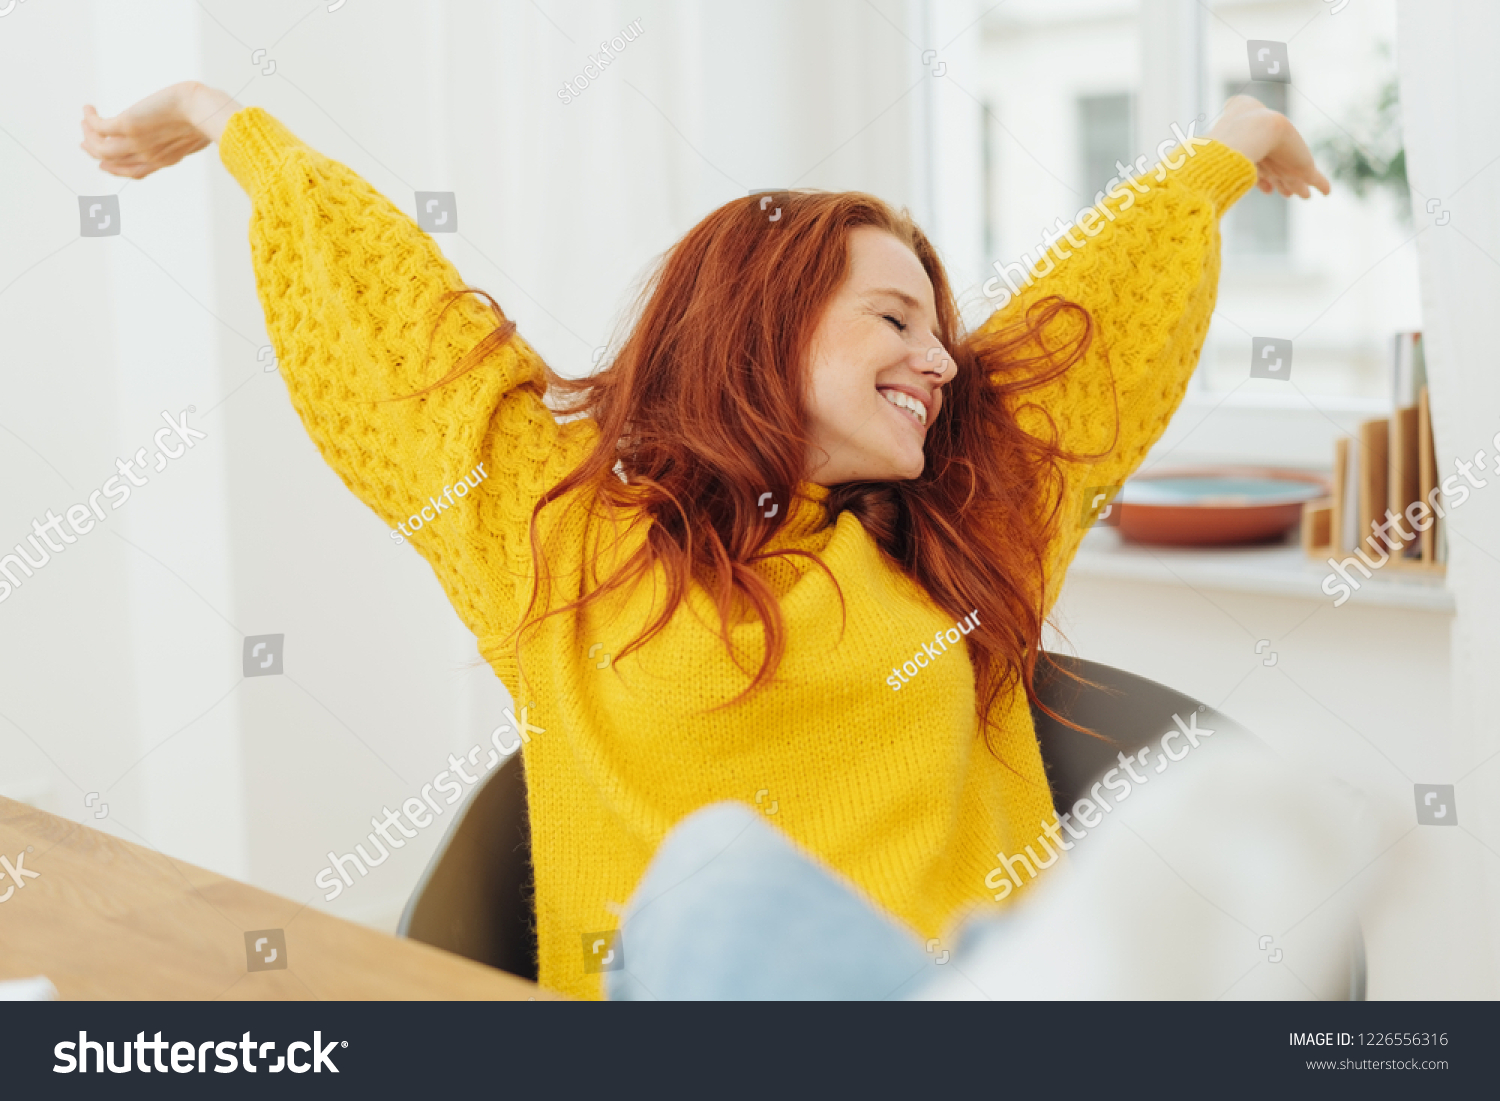 Happy pretty young woman stretching her arms as she leans back relaxing in her chair with a beaming smile #1226556316